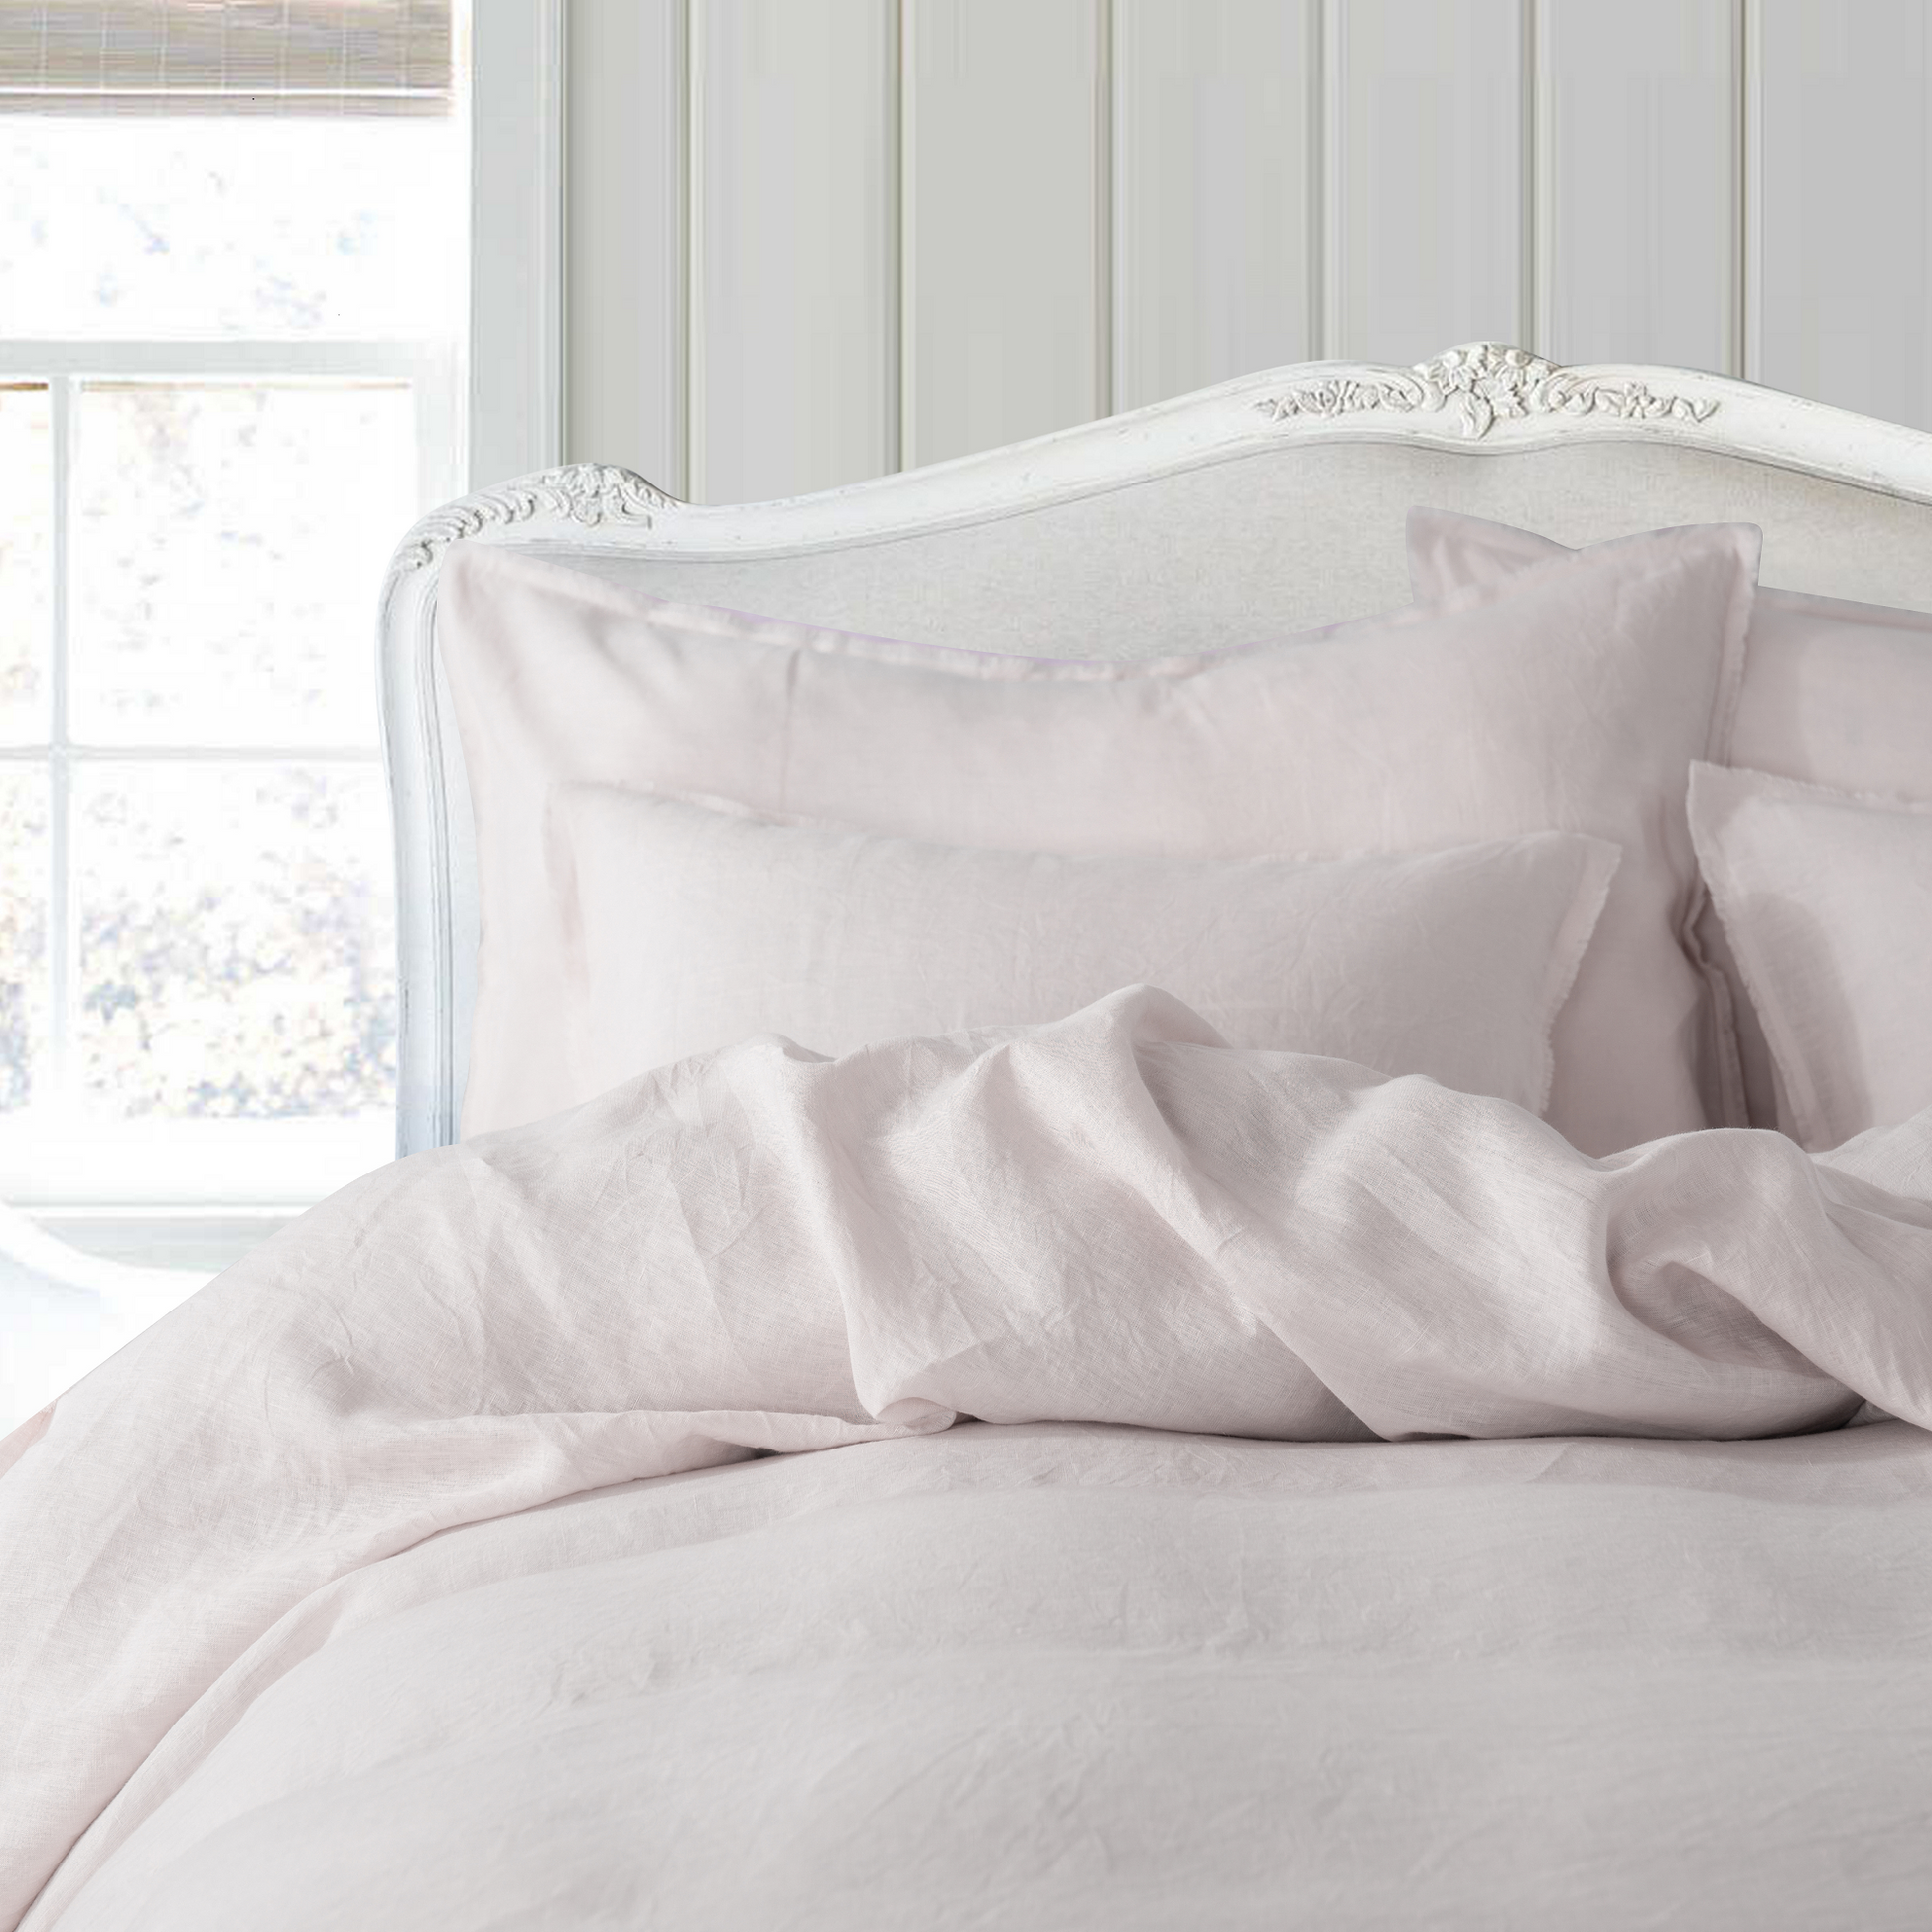 Shop Duvet Cover and Shams online for bedroom decor in USA